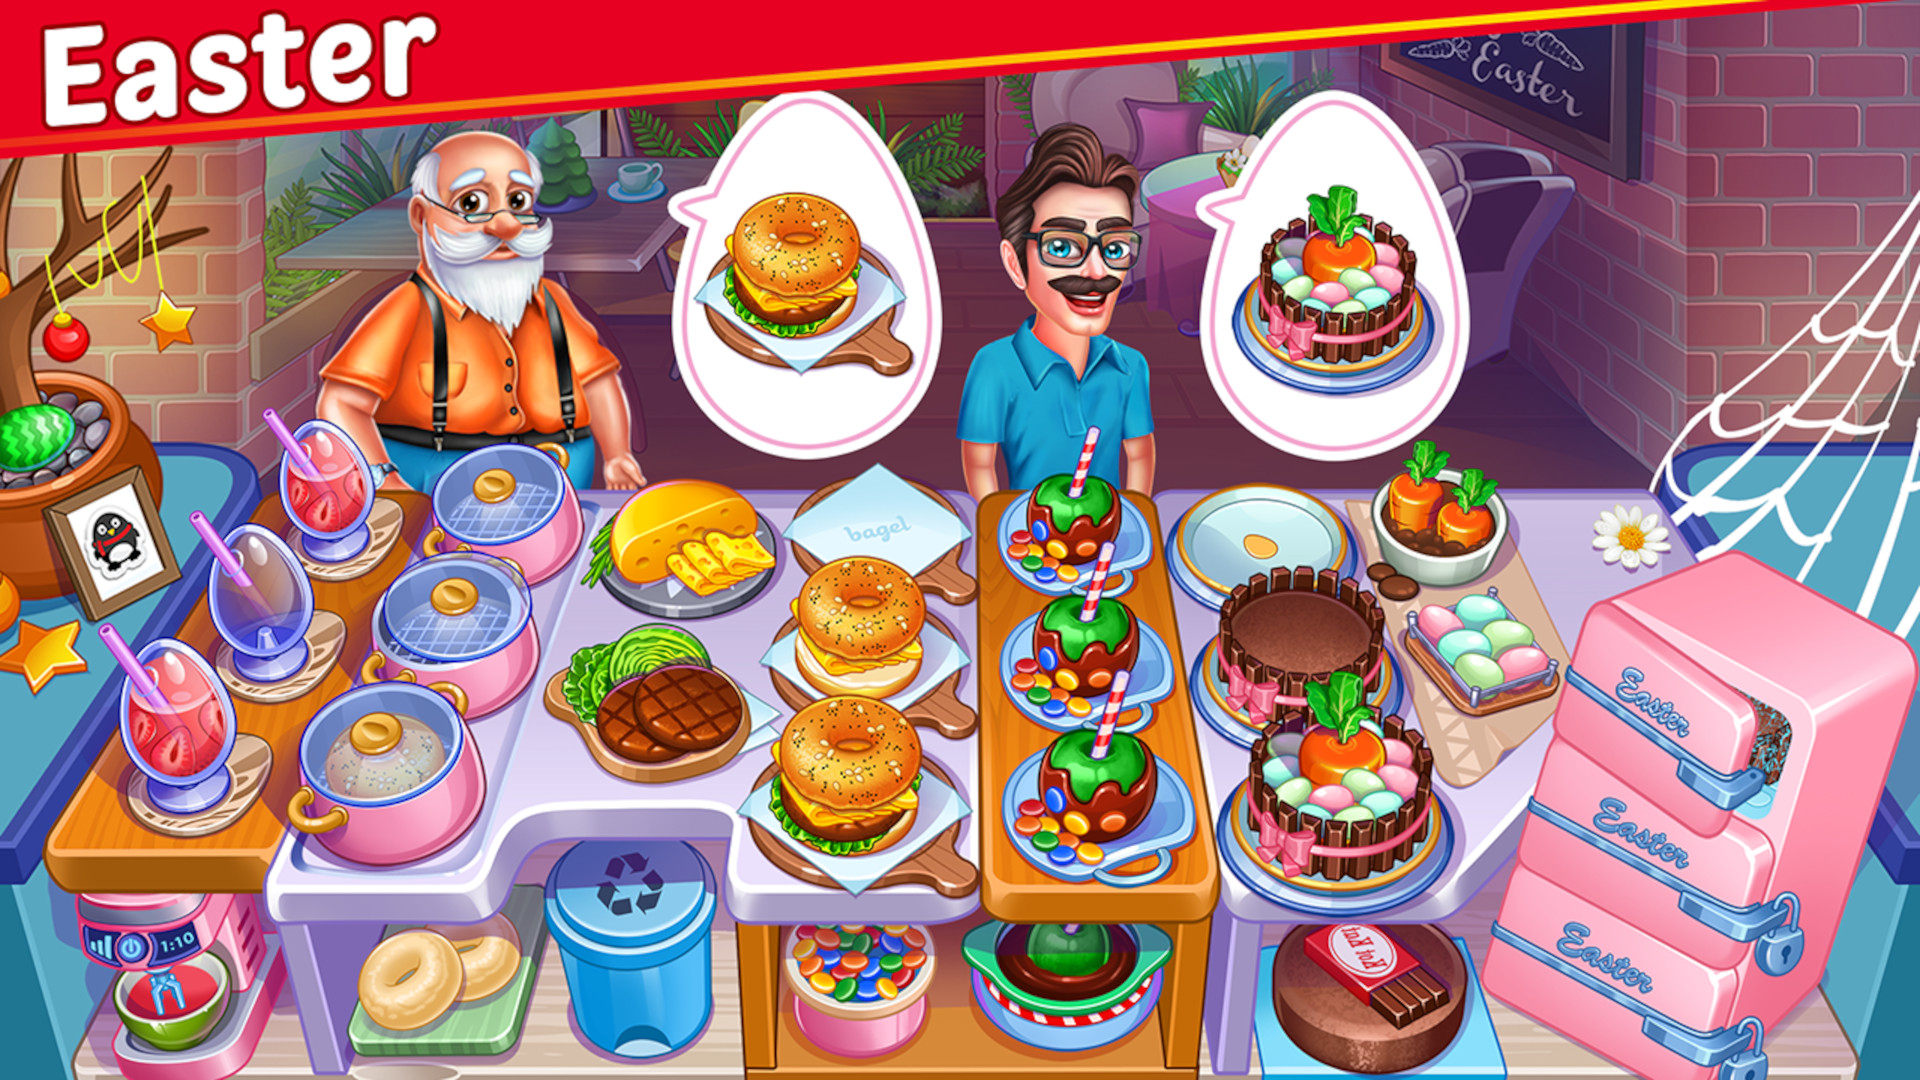 Cooking games: A screenshot from the Easter event in Halloween Cooking Games